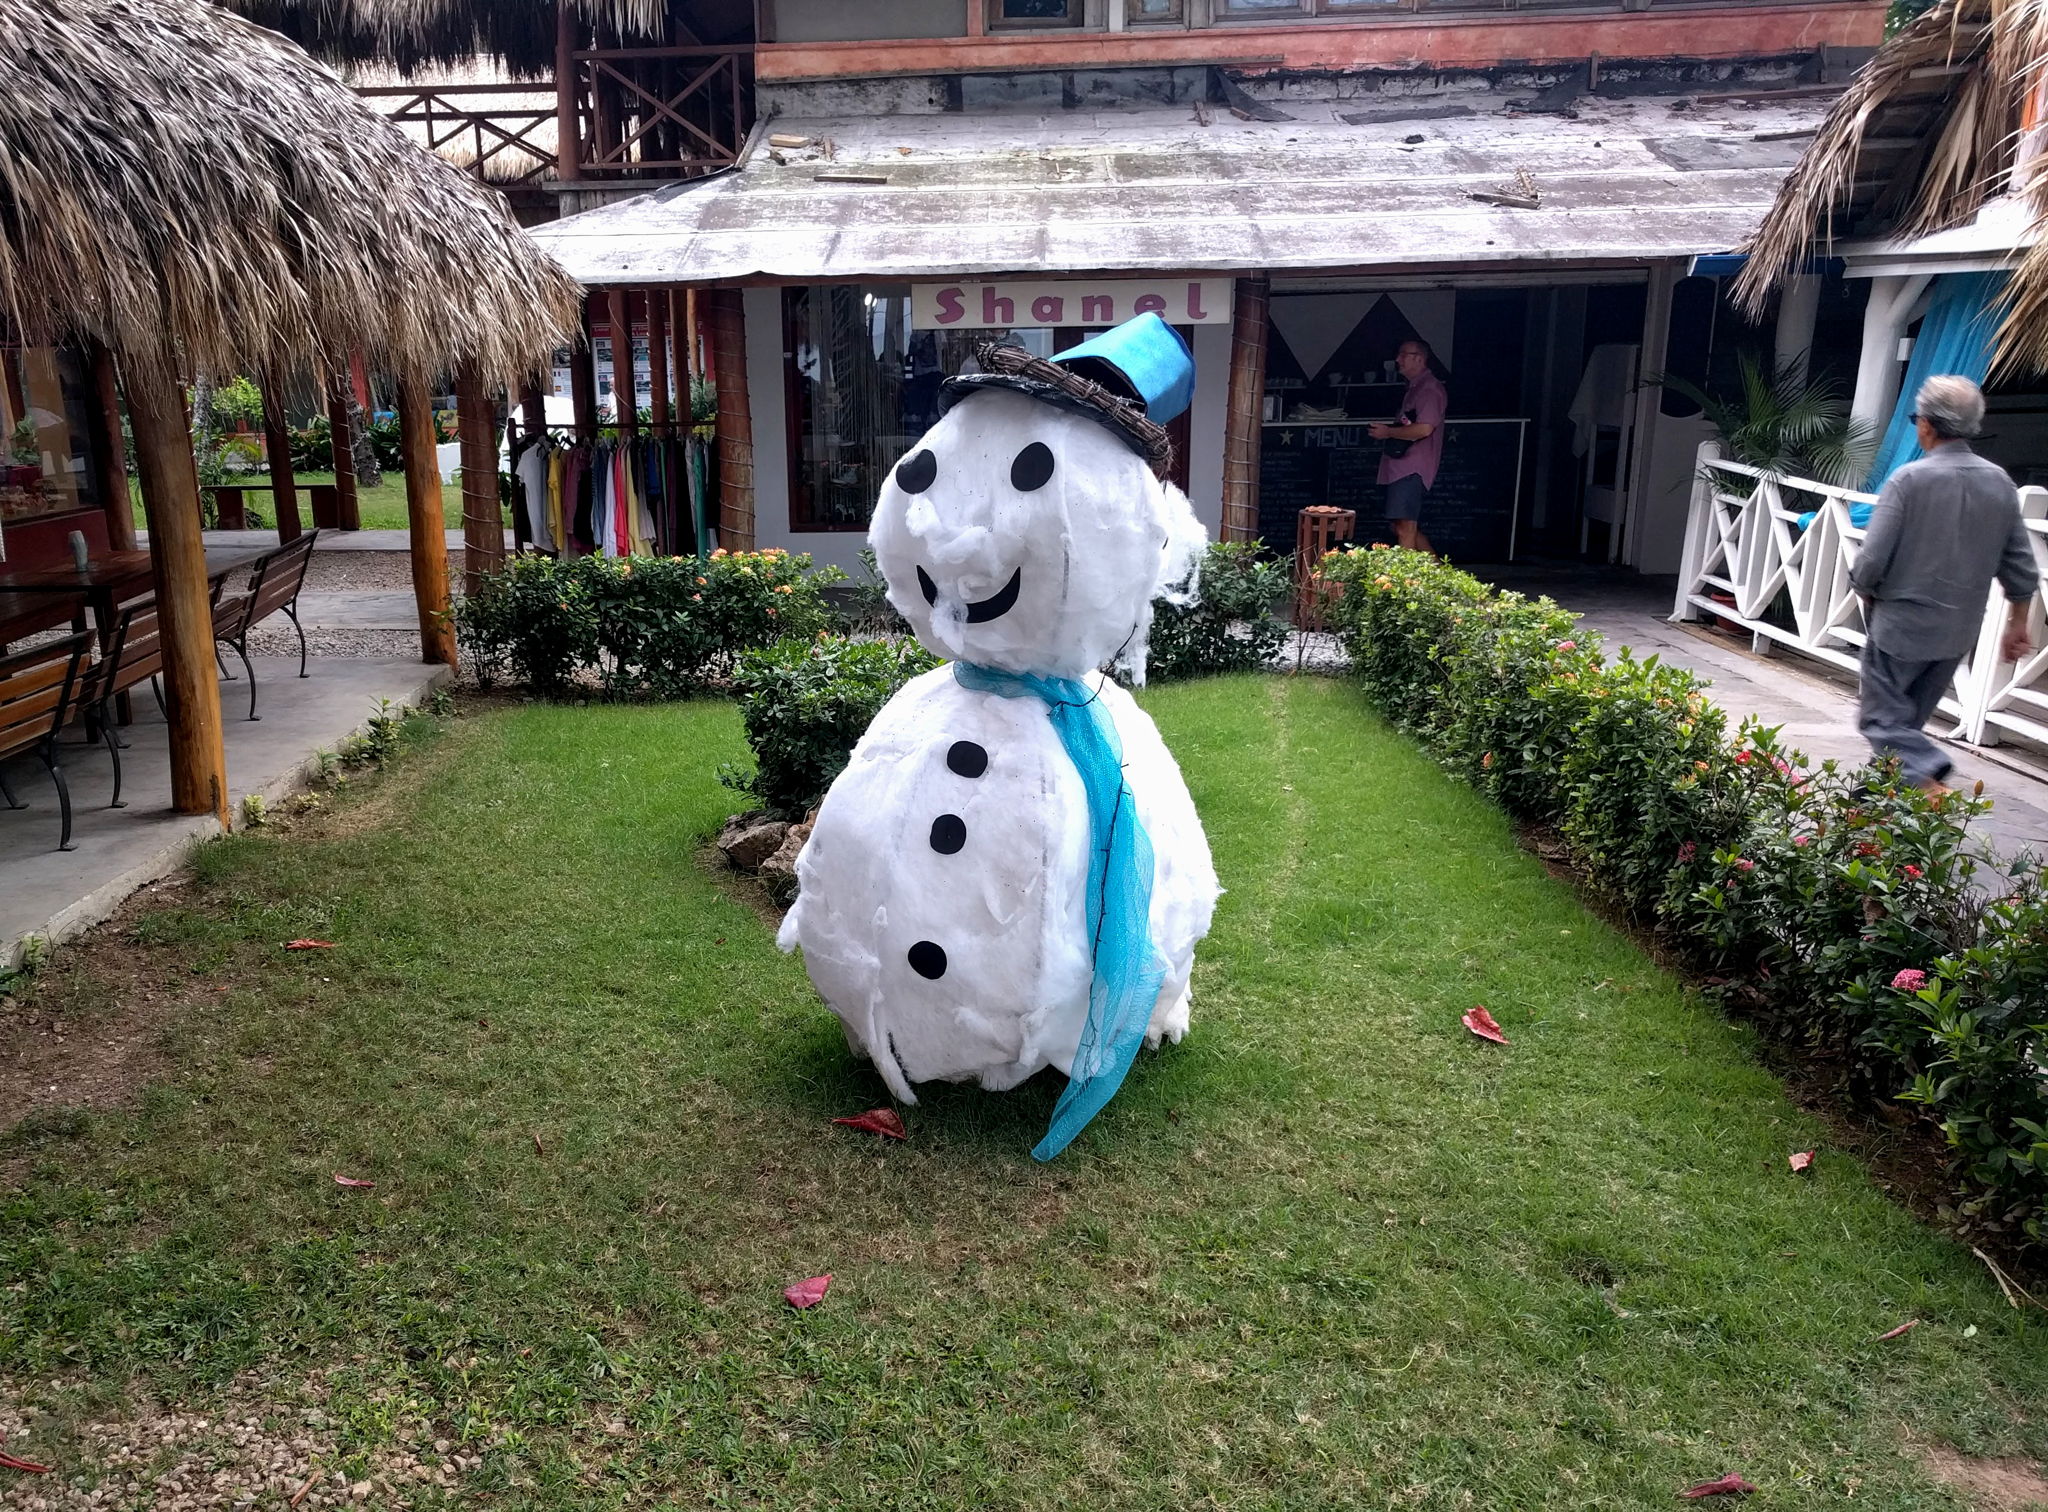 A snowman made with cotton wool and a mosquito net